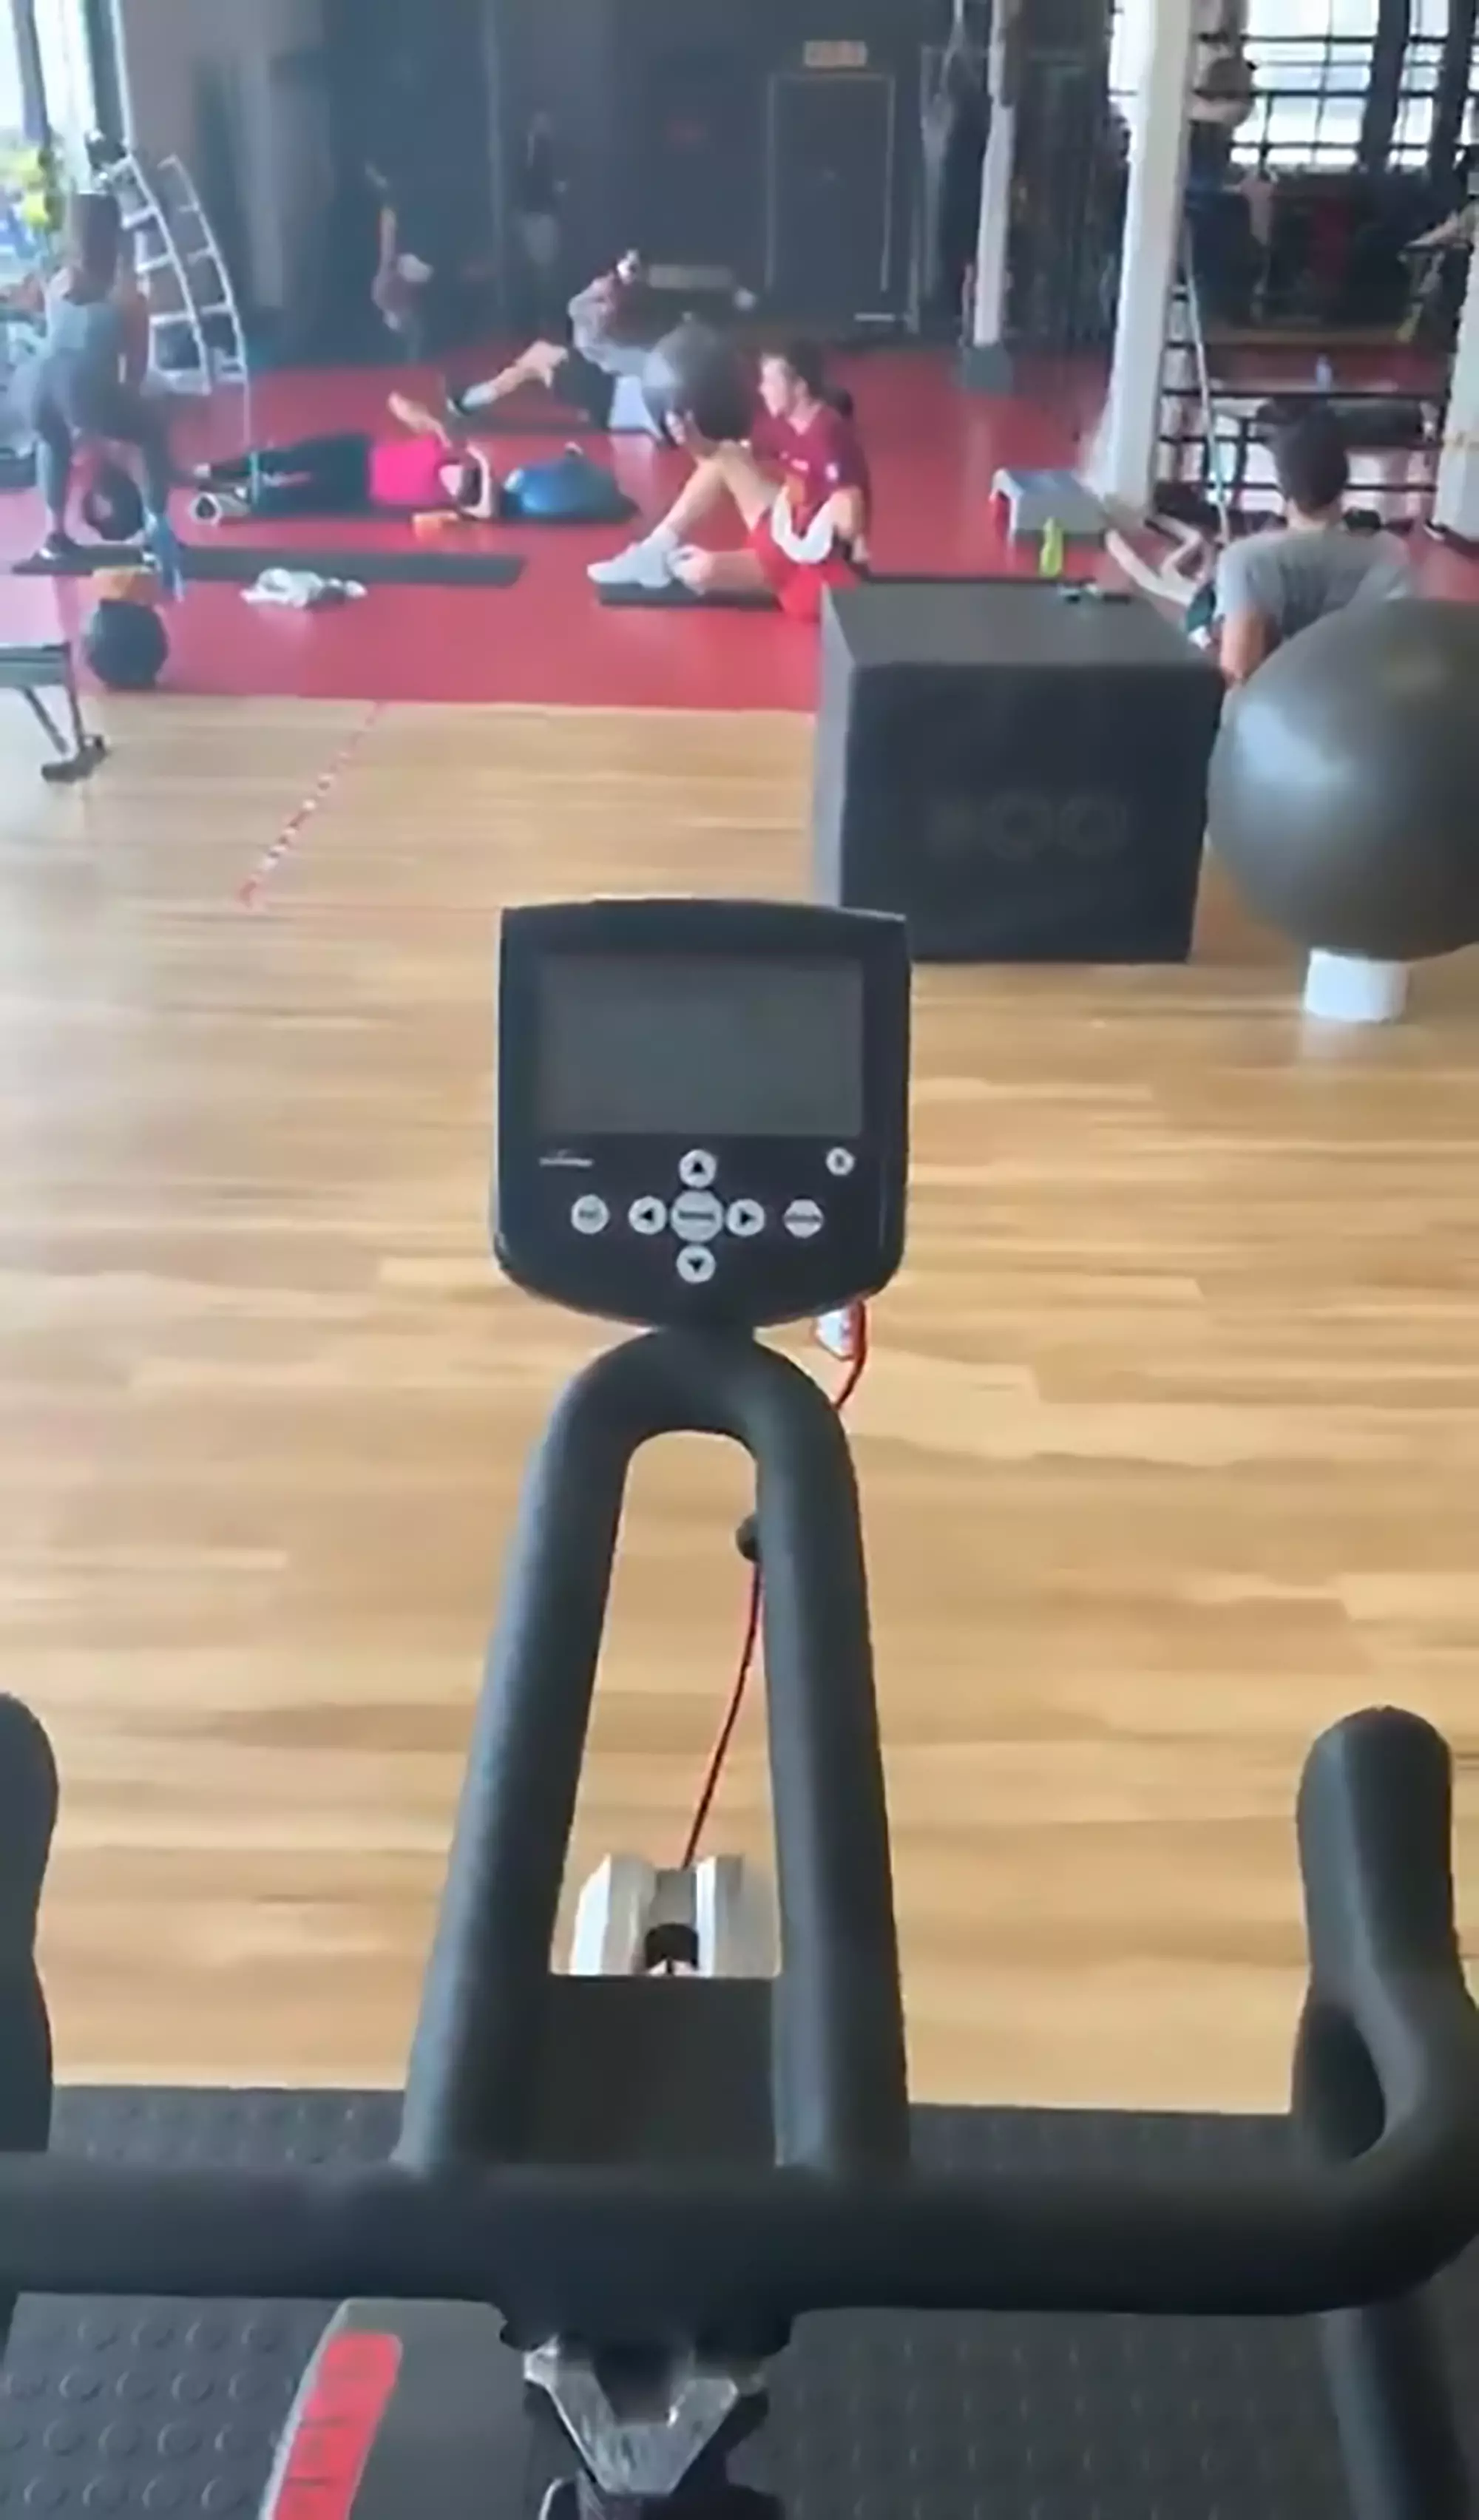 Another gym-goer filmed the incident.